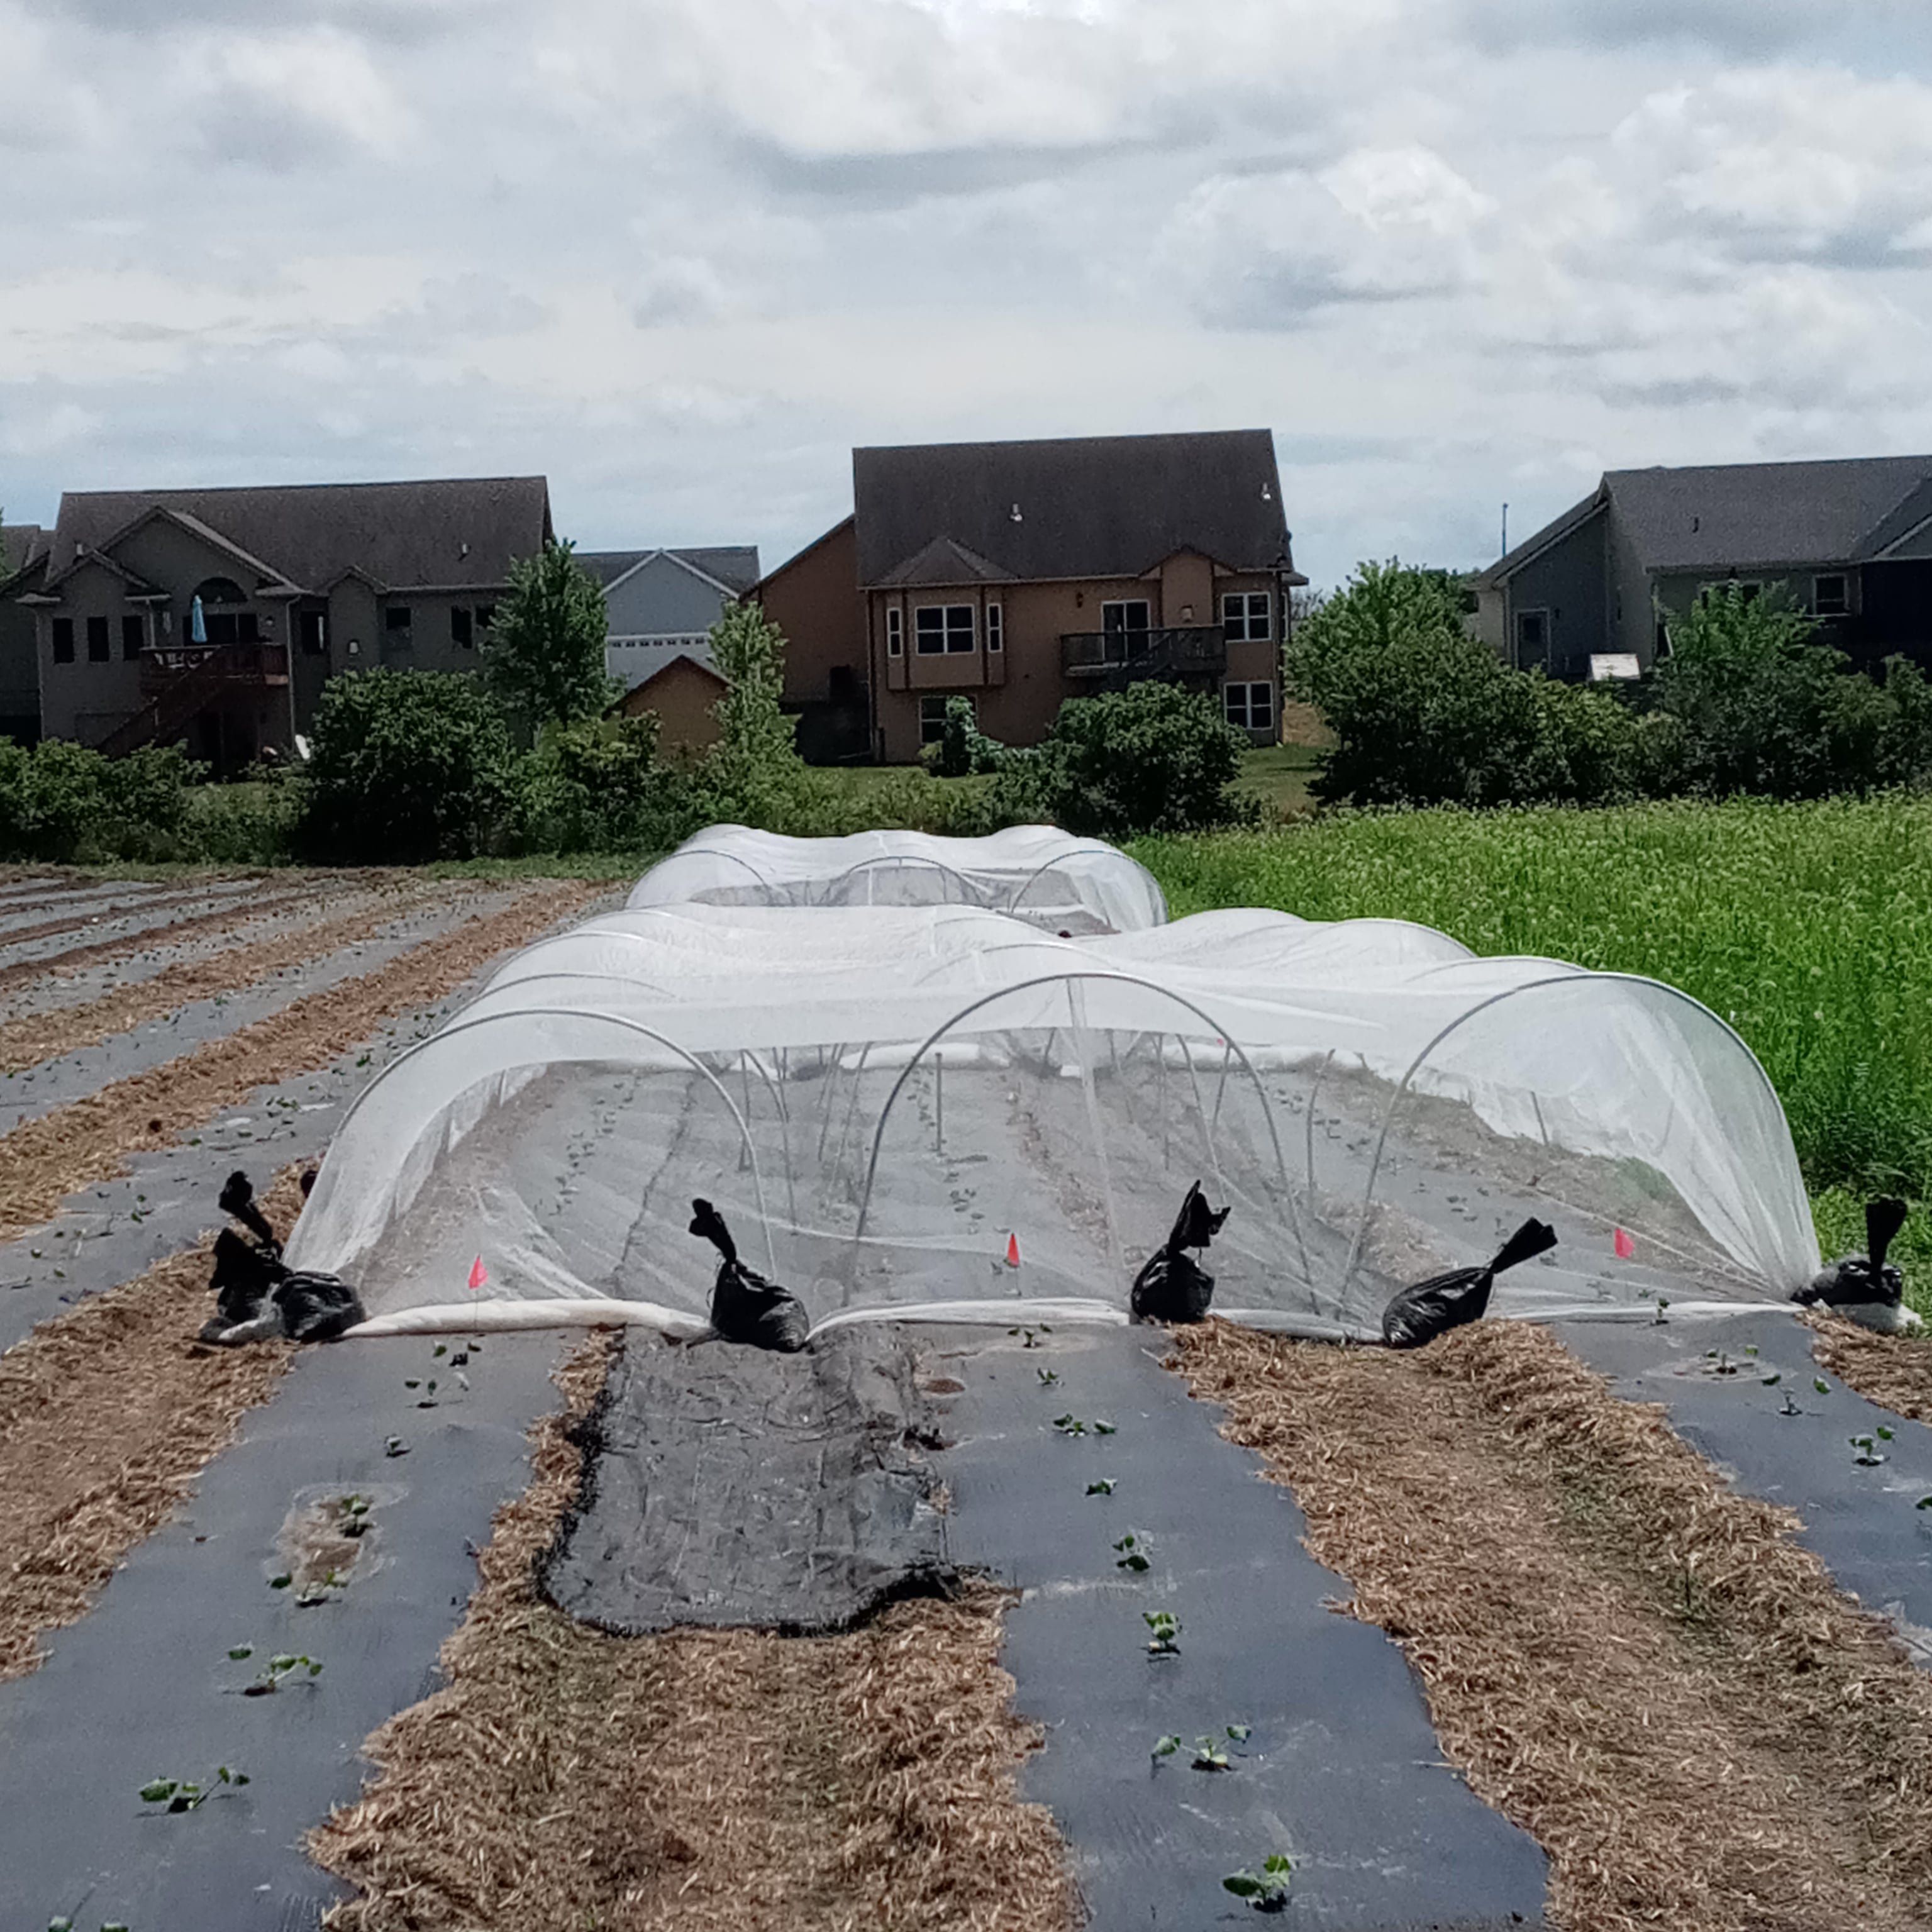 Previous Happening: Farm Happenings for July 22, 2020